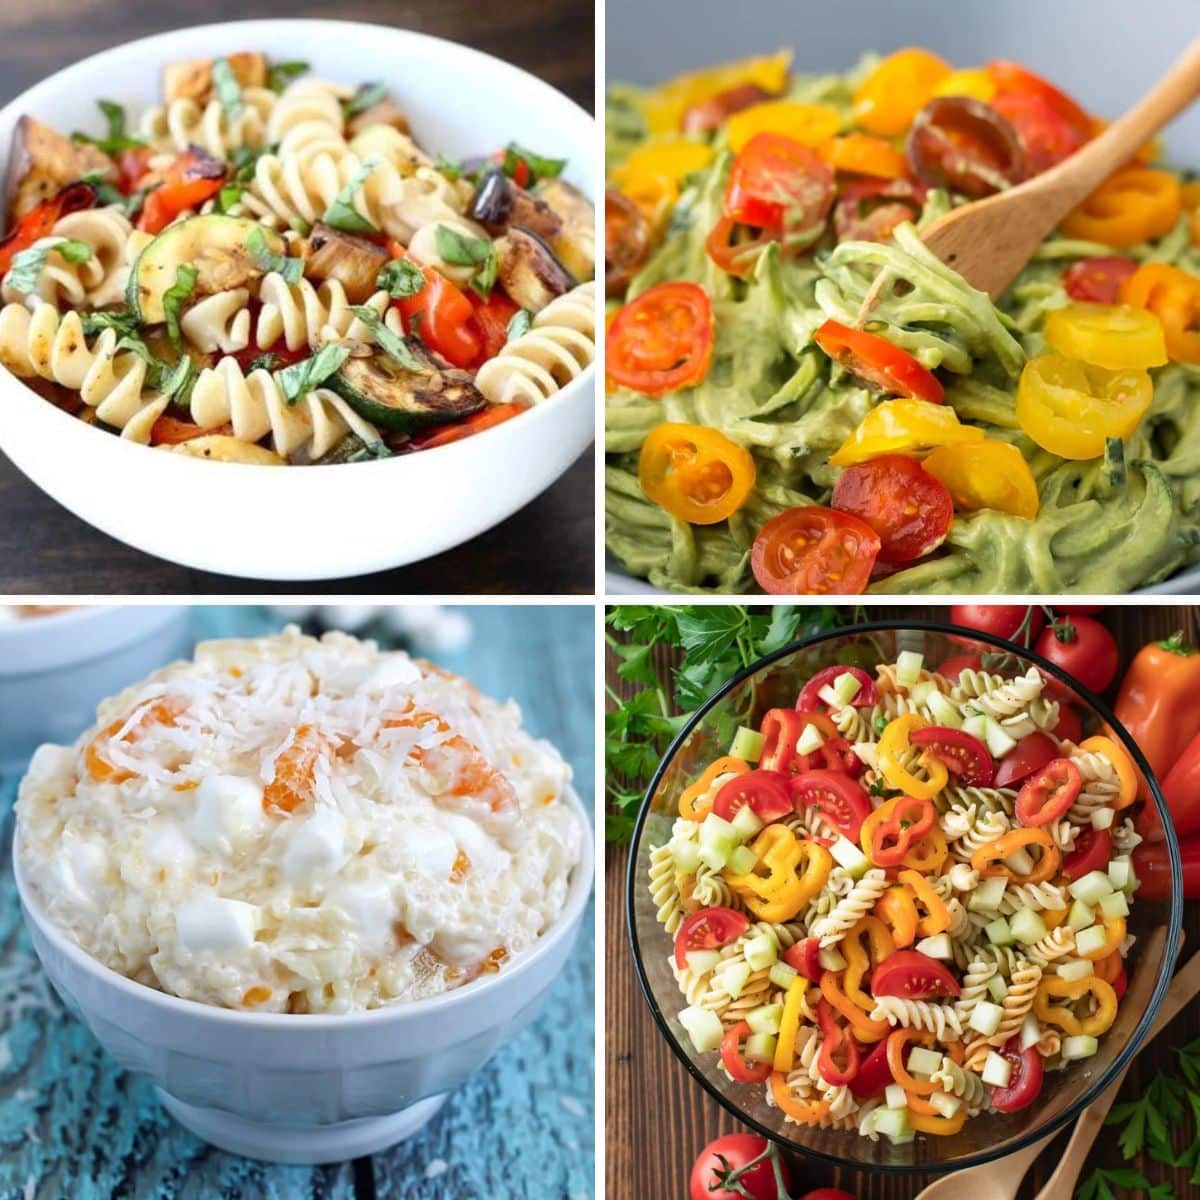 4 images of pasta salads for your kids.